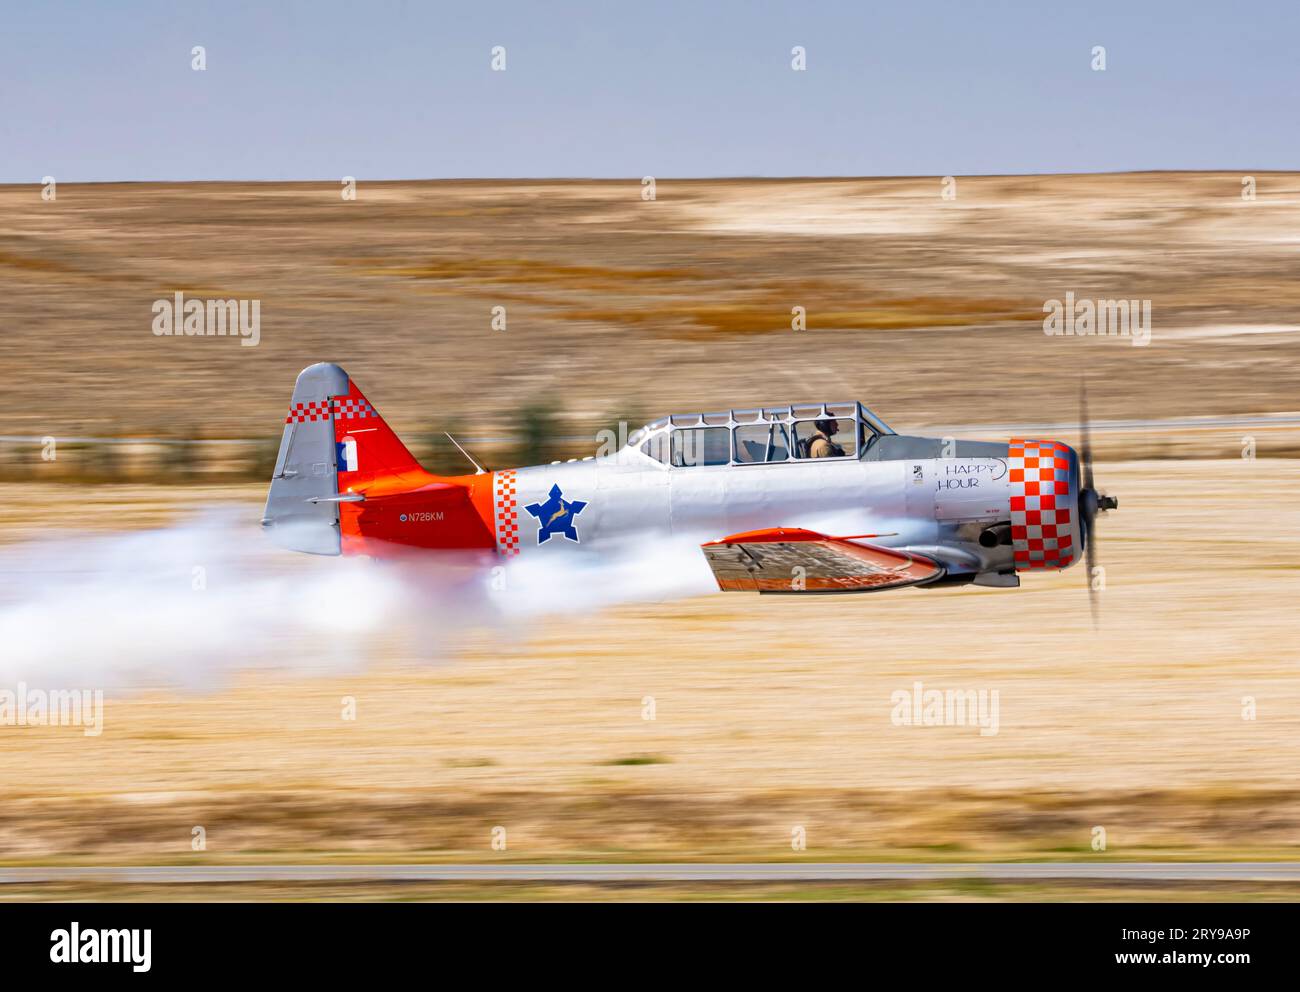 NORTH AMERICAN T-6G TEXAN Happy hour at SHG Air Show Stock Photo